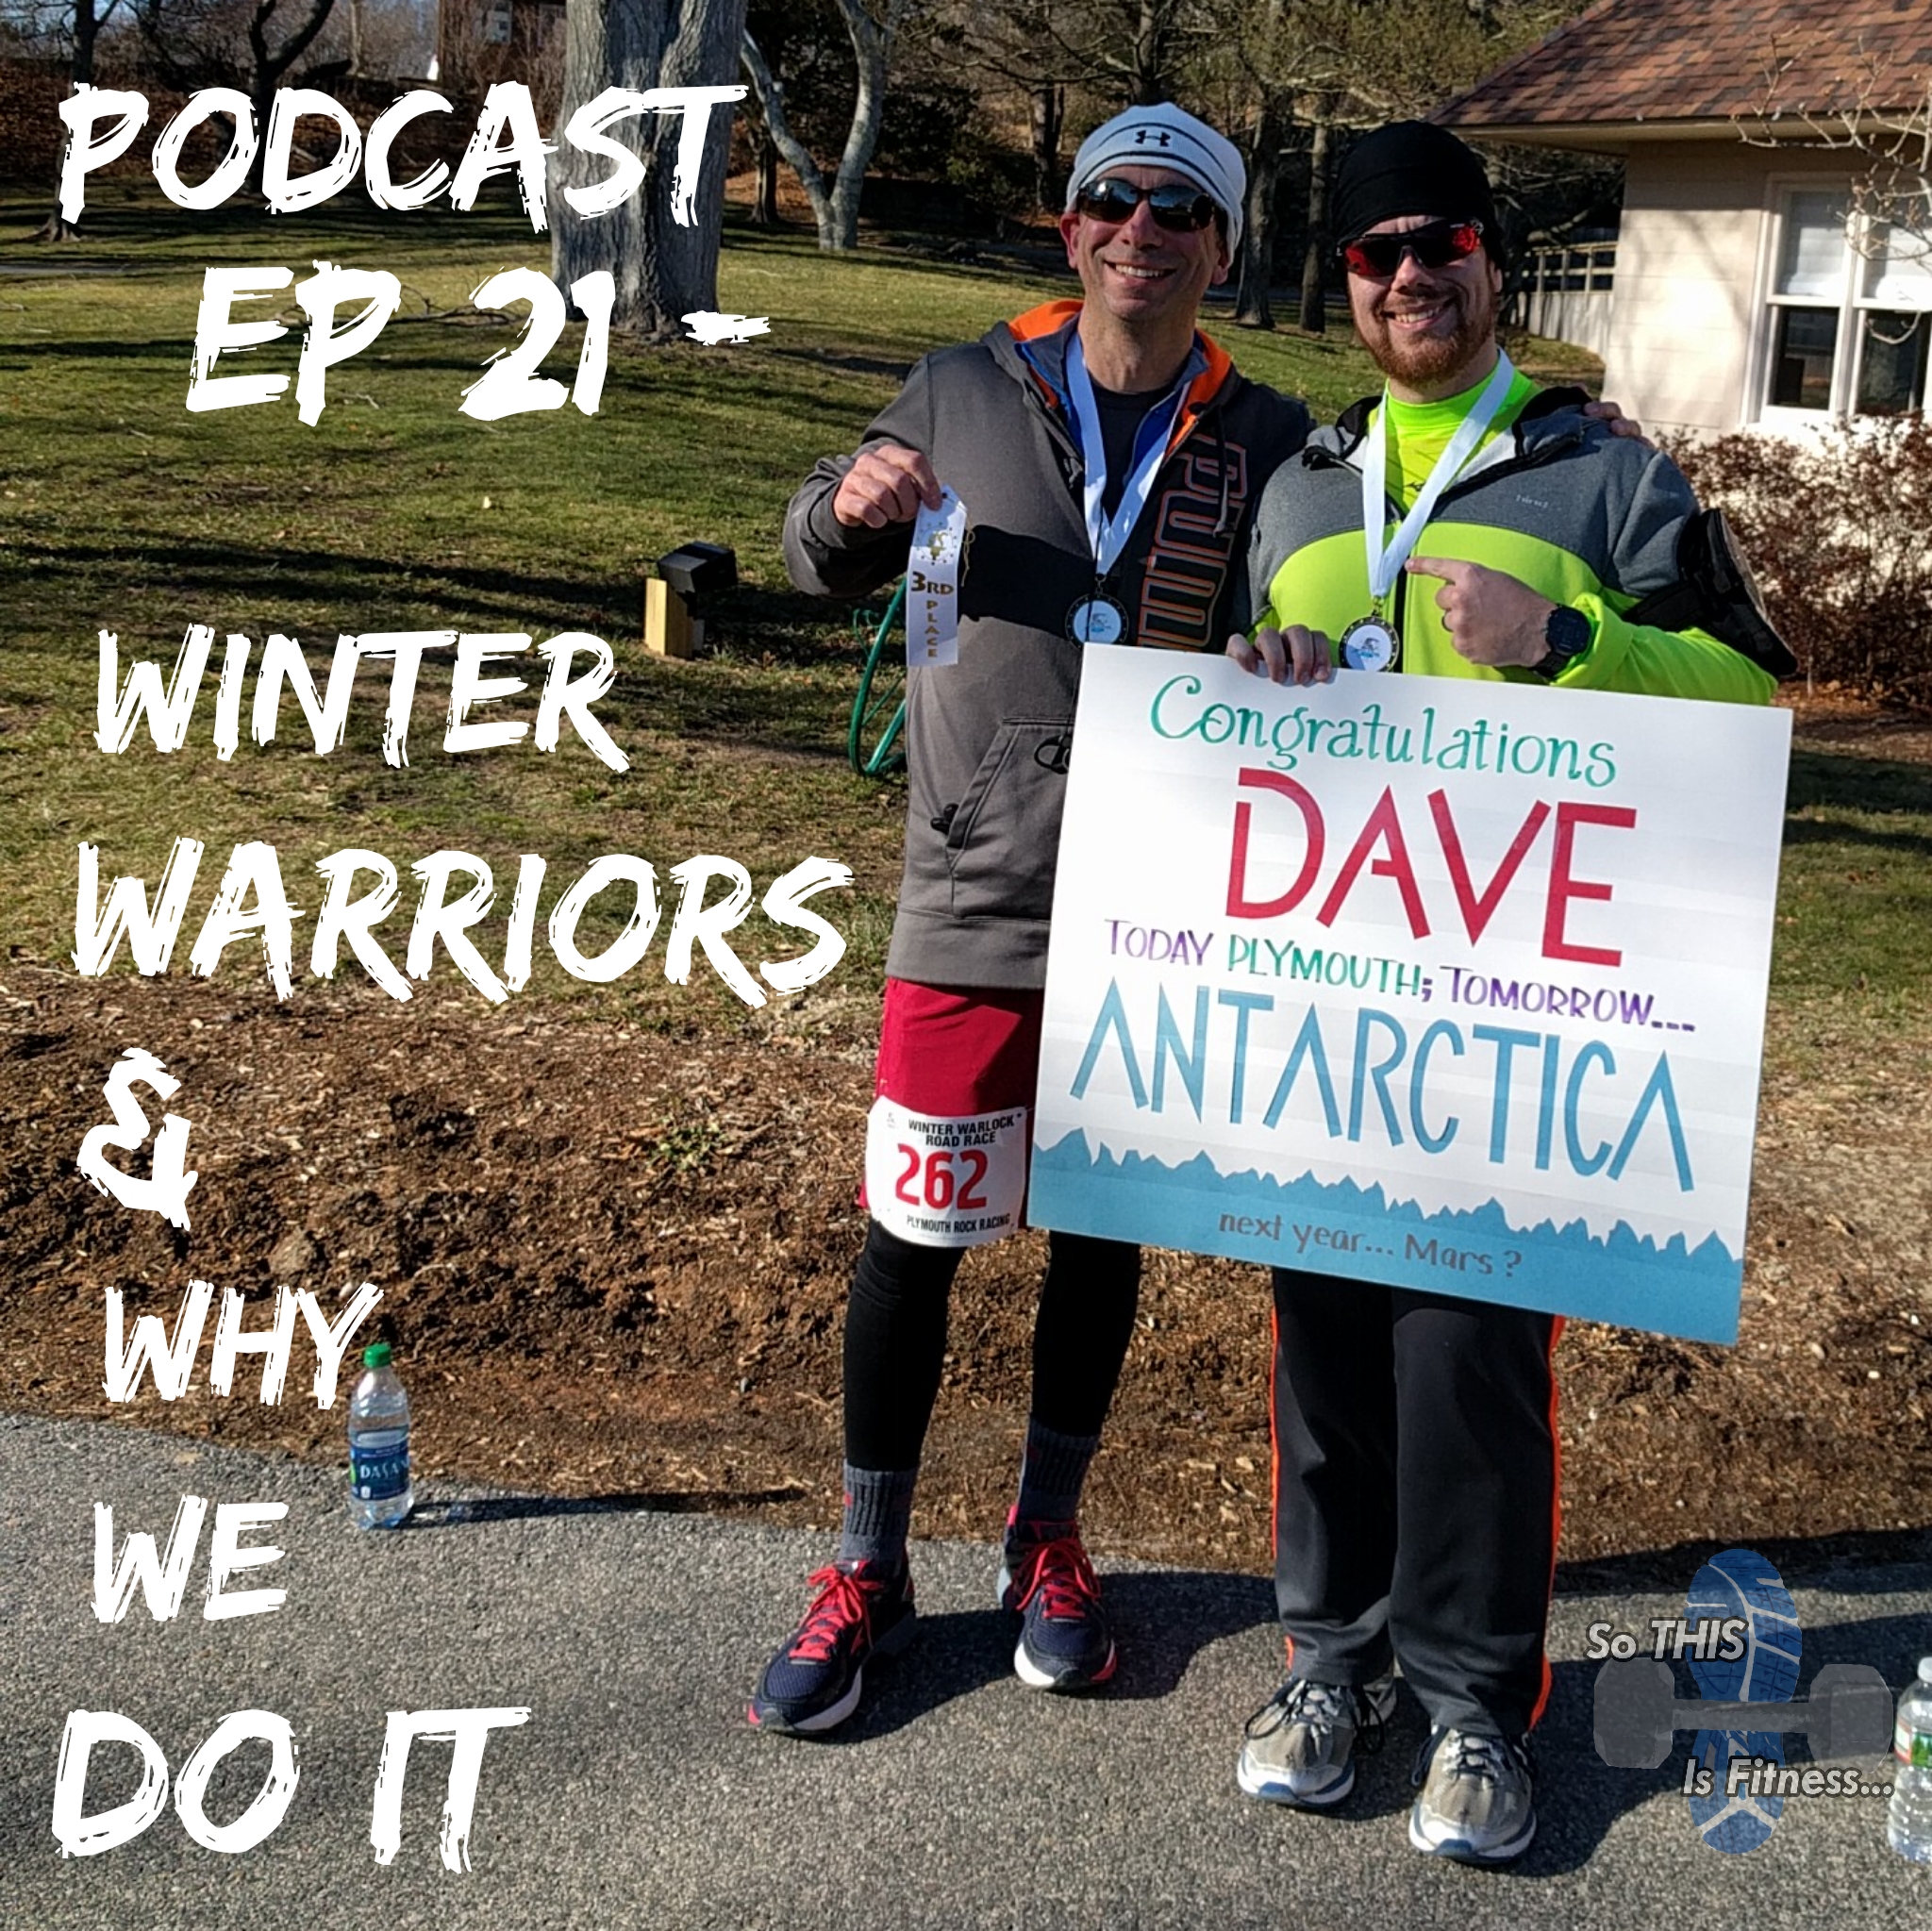 Podcast Ep 21 Winter Warriors & Why We Do It